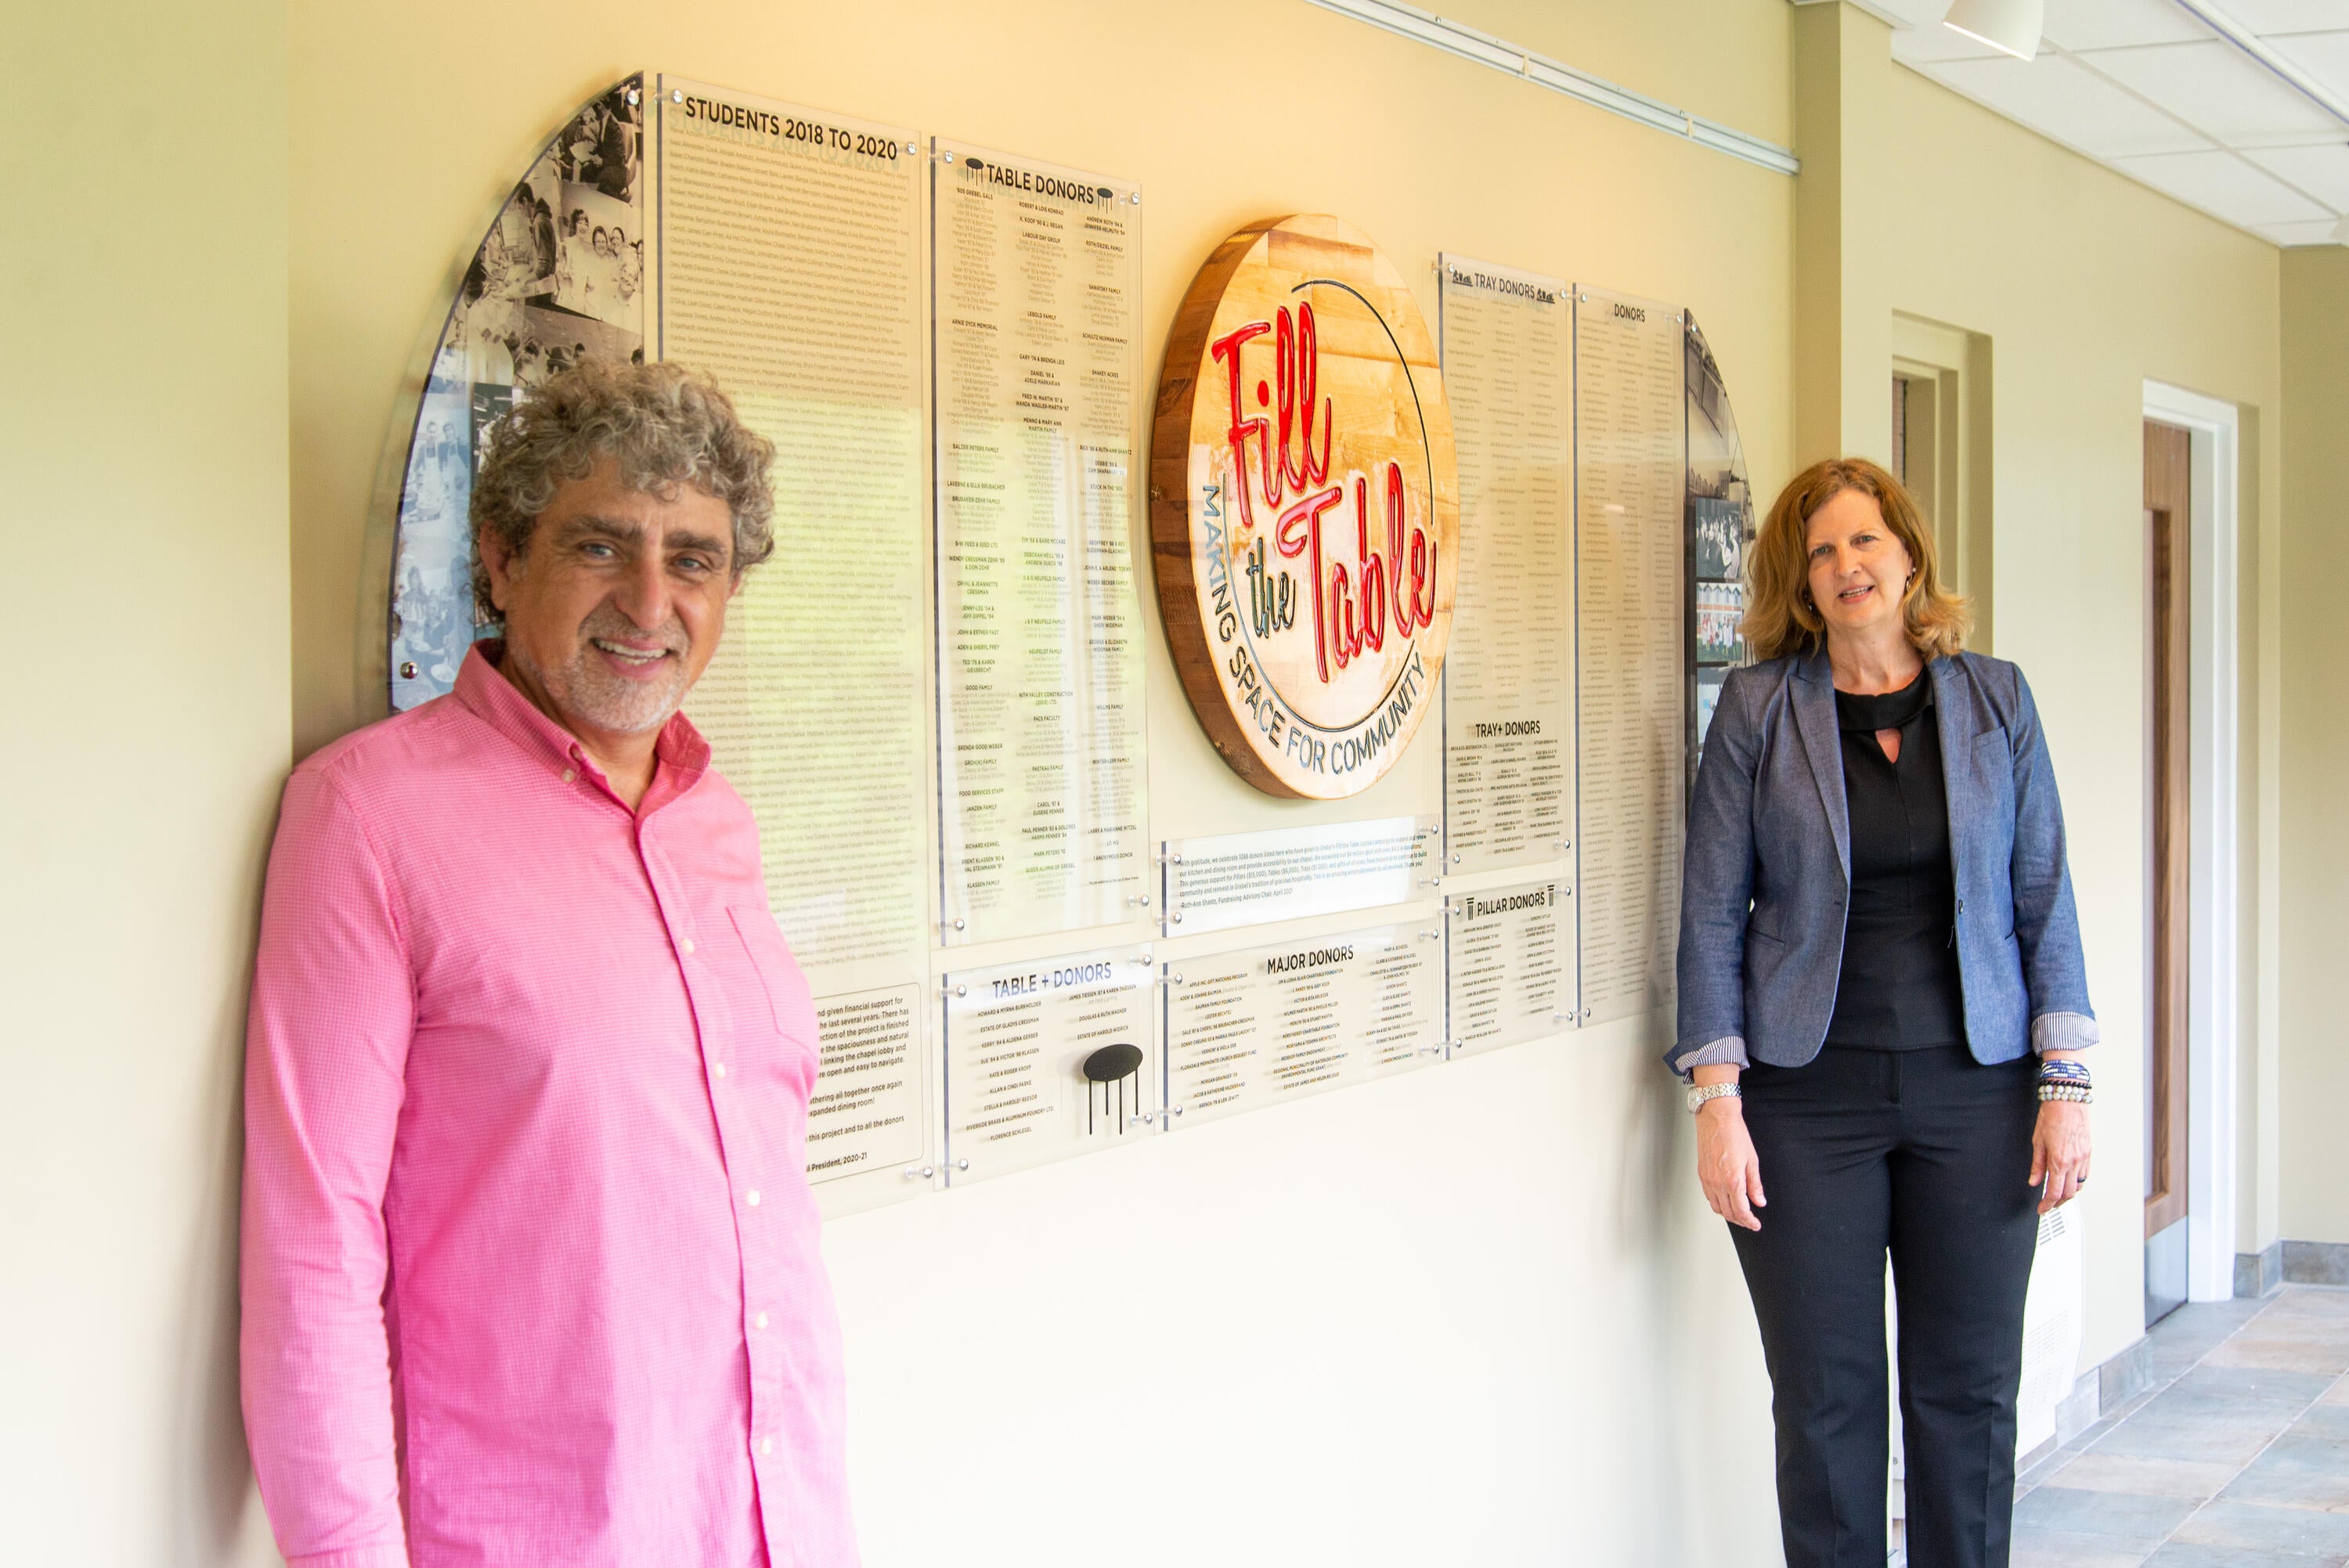 Fred and Ruth stand in front of the Donor wall